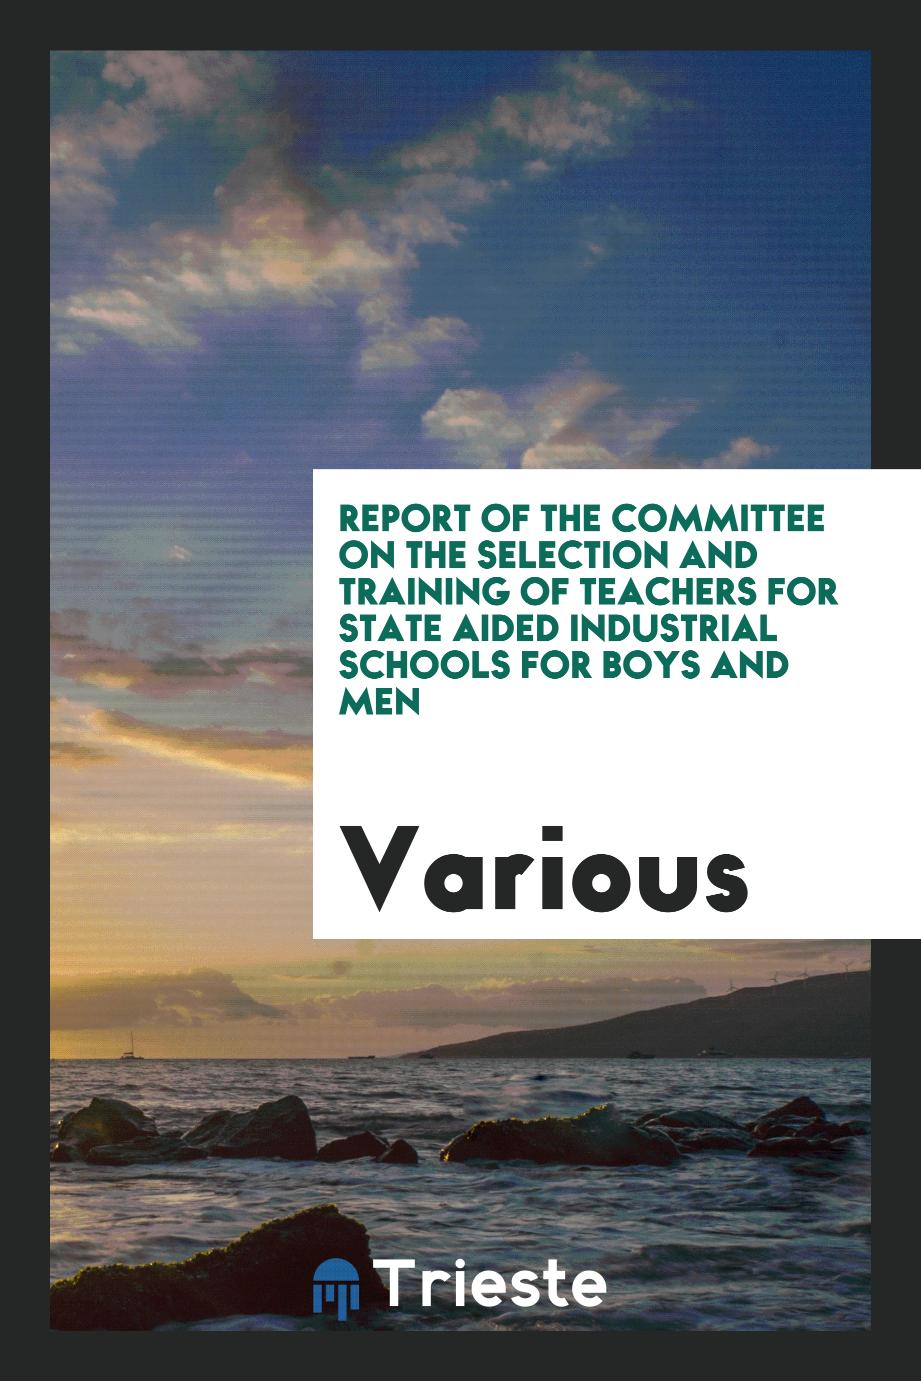 Report of the committee on the selection and training of teachers for state aided industrial schools for boys and men